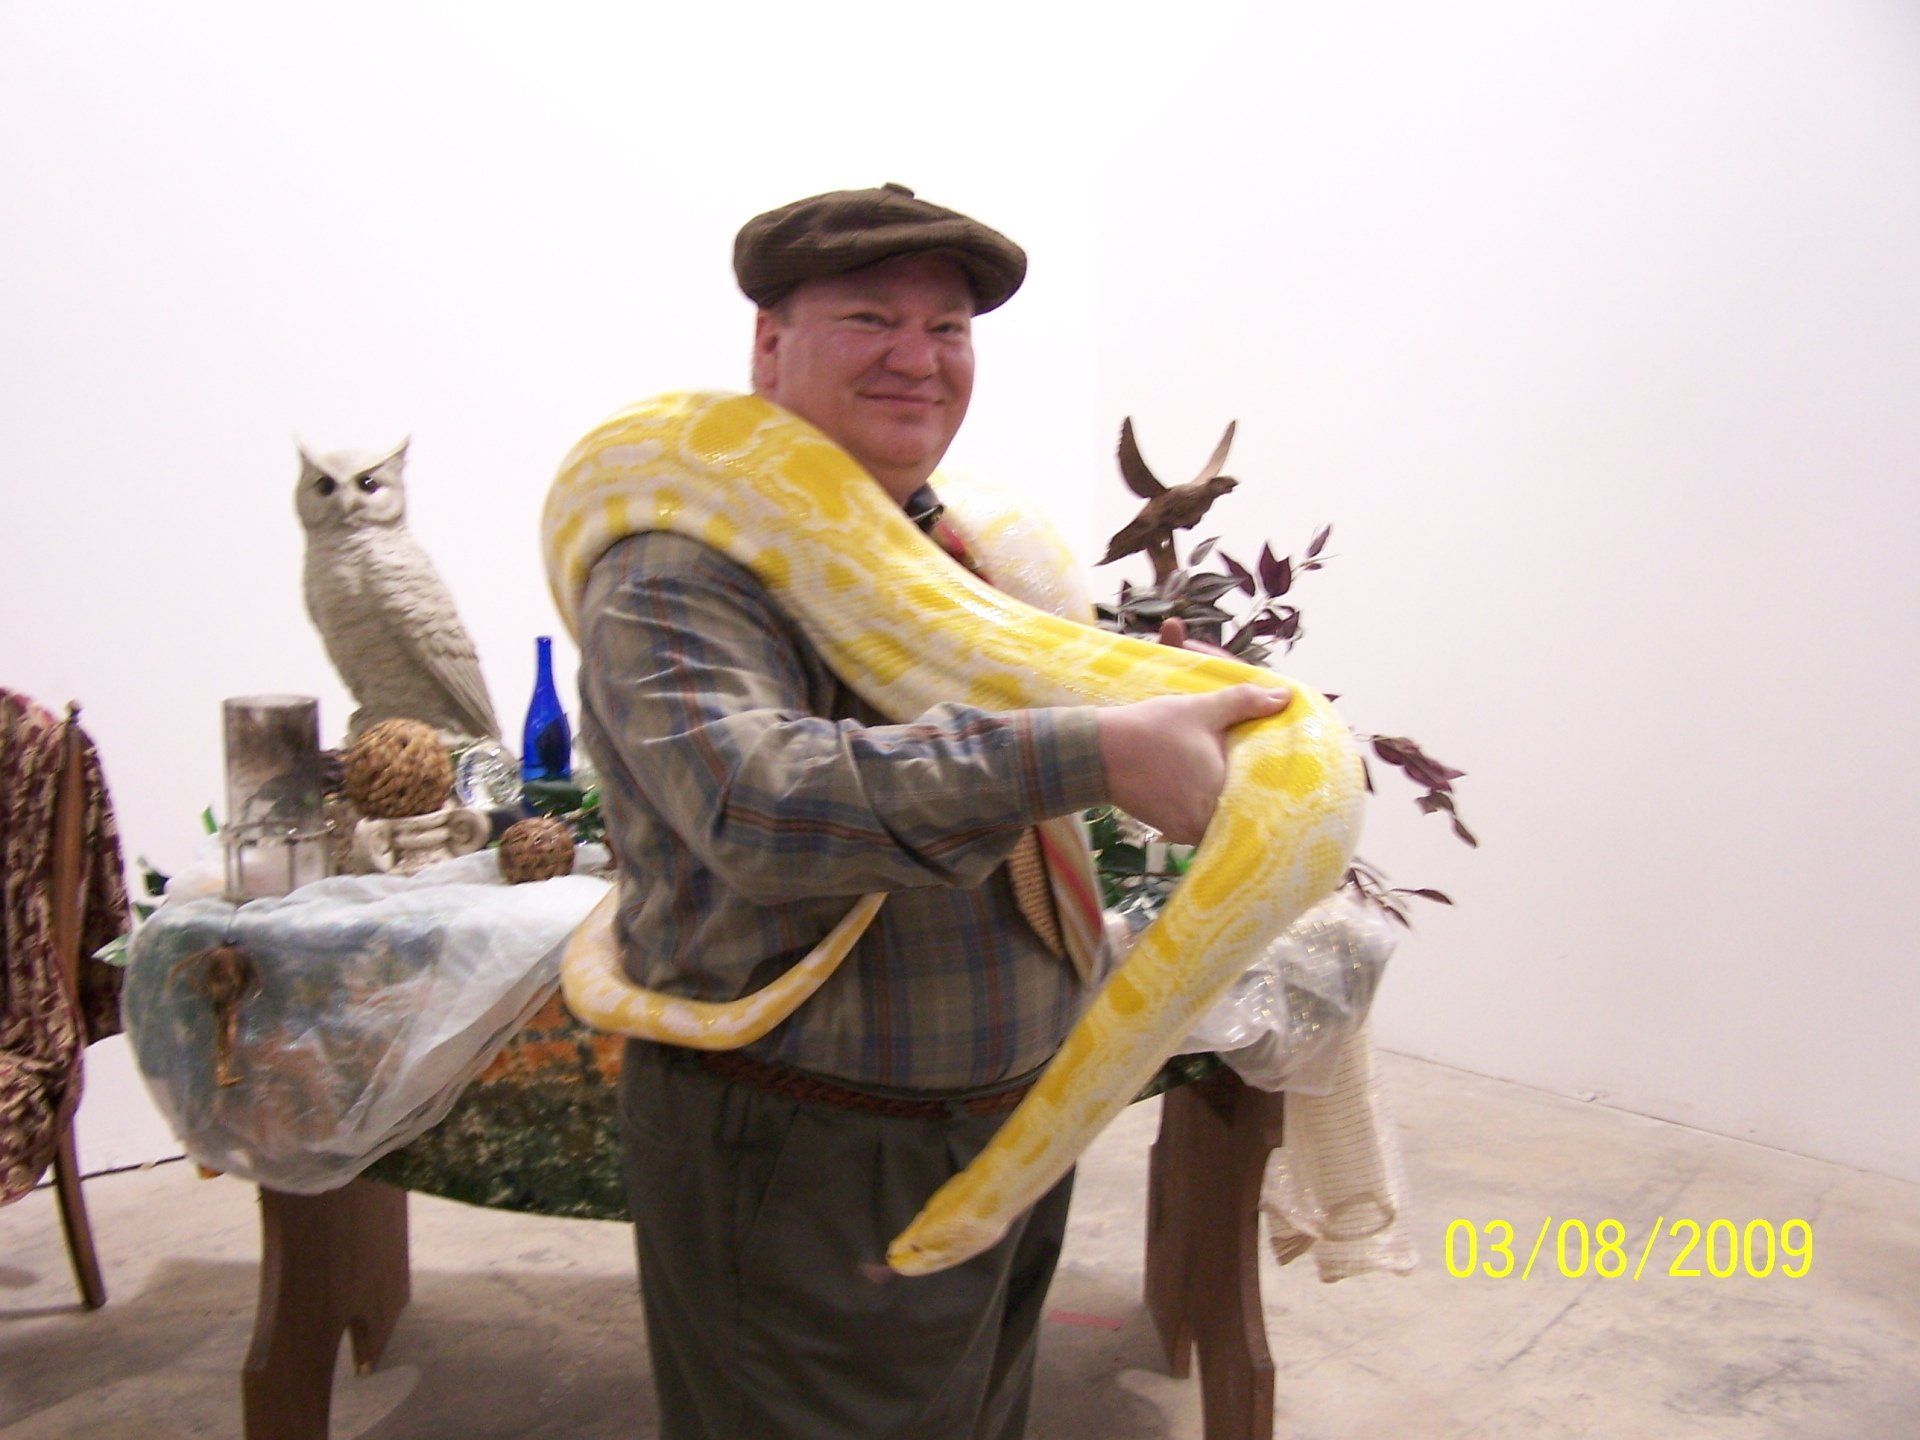 Professor Buzby with magical snake